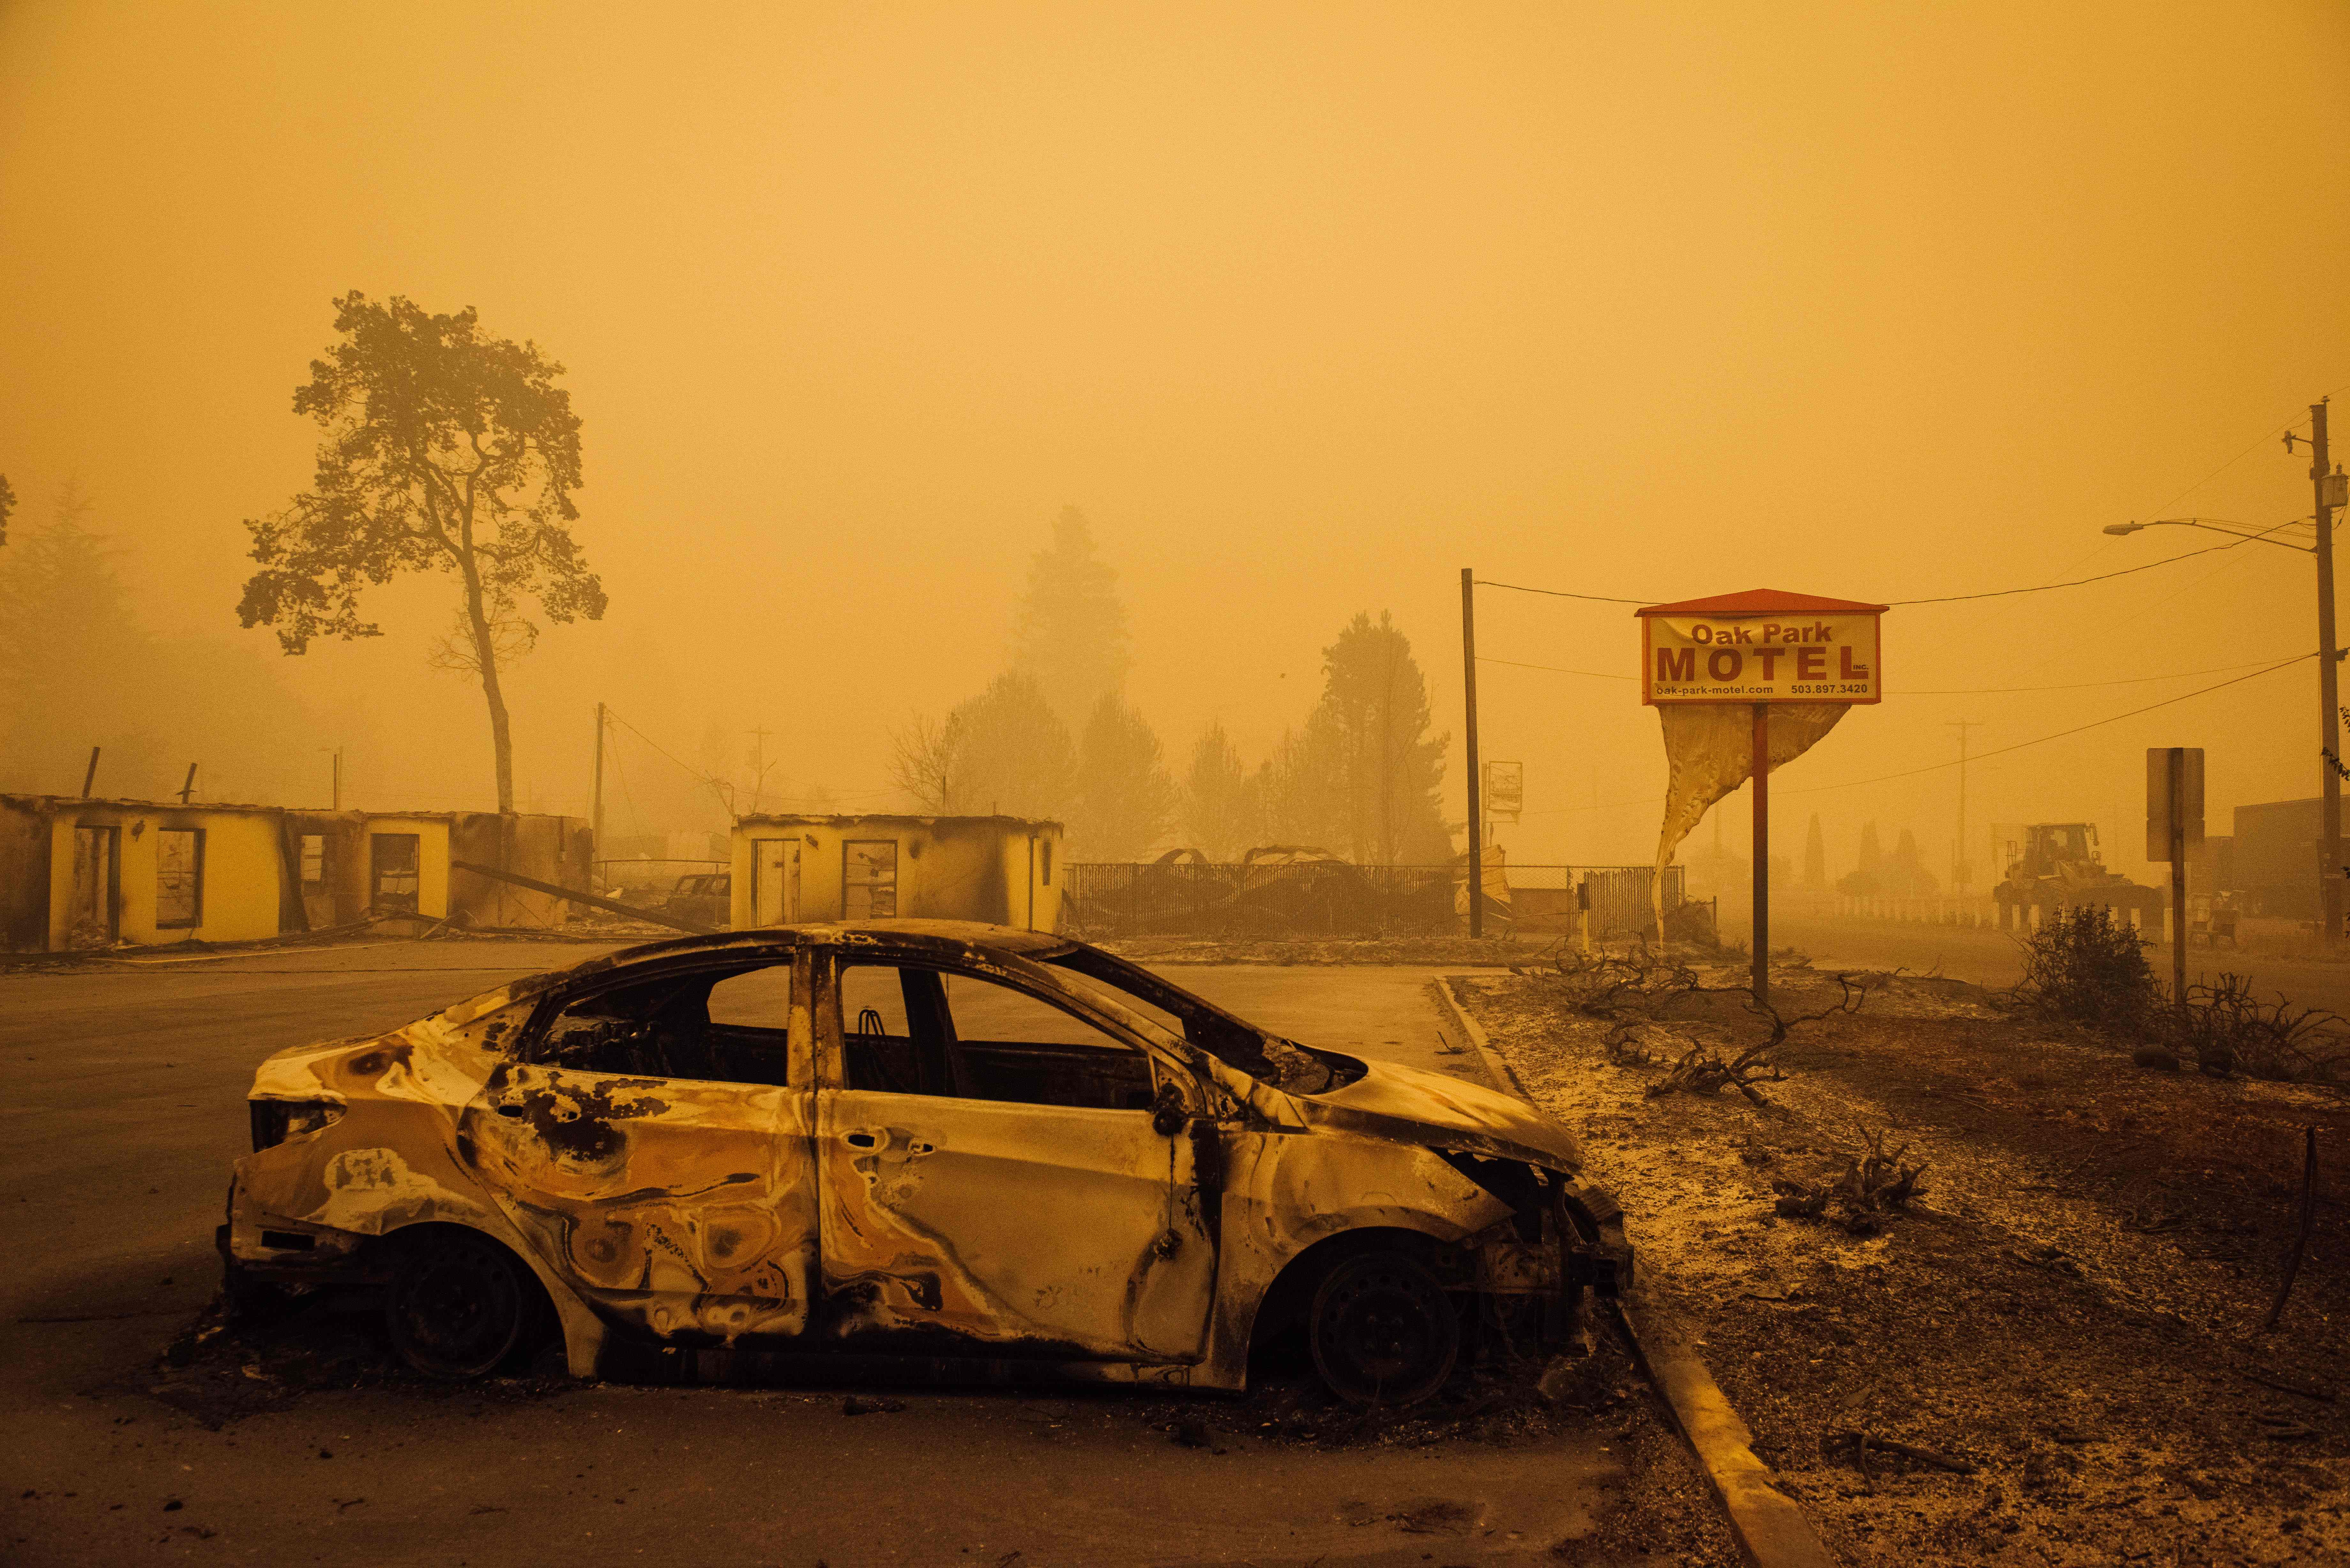 A car charred by the in Santiam Fire in Gates, Oregon